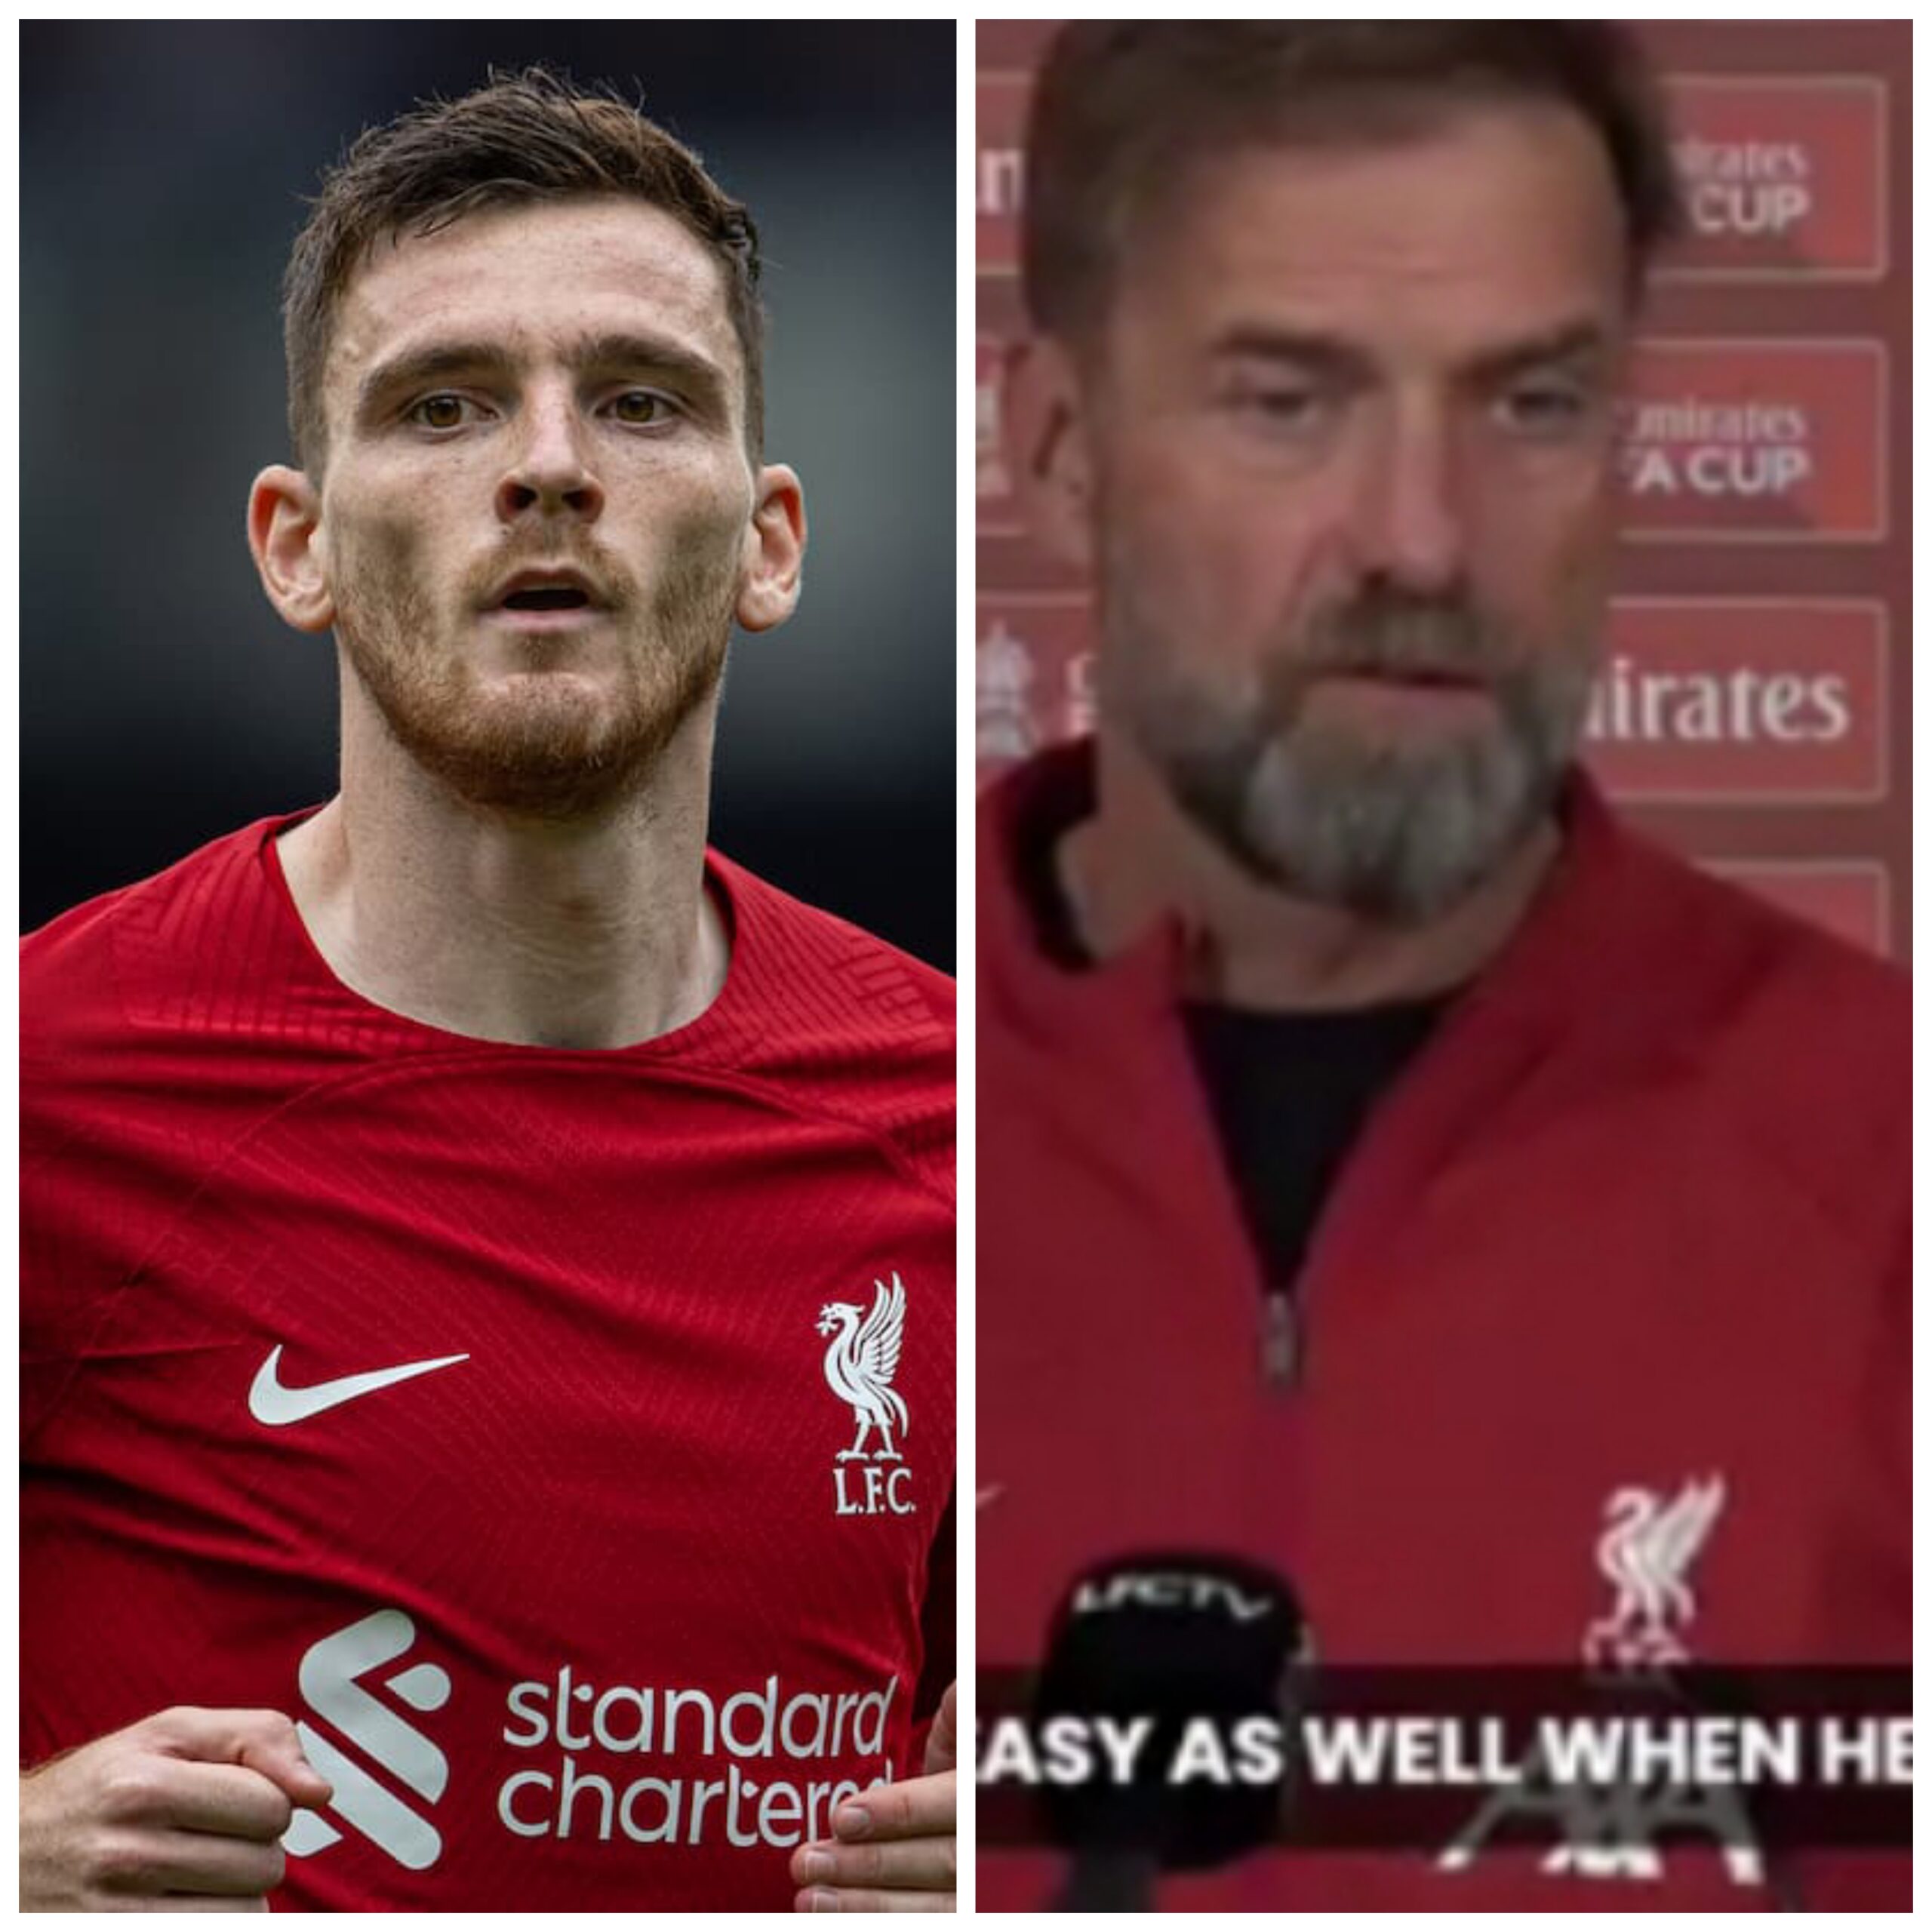 "Not True"-Jurgen Klopp reacts to Andy Robertson's blunt claim that Liverpool are getting worse 1 Sportelo